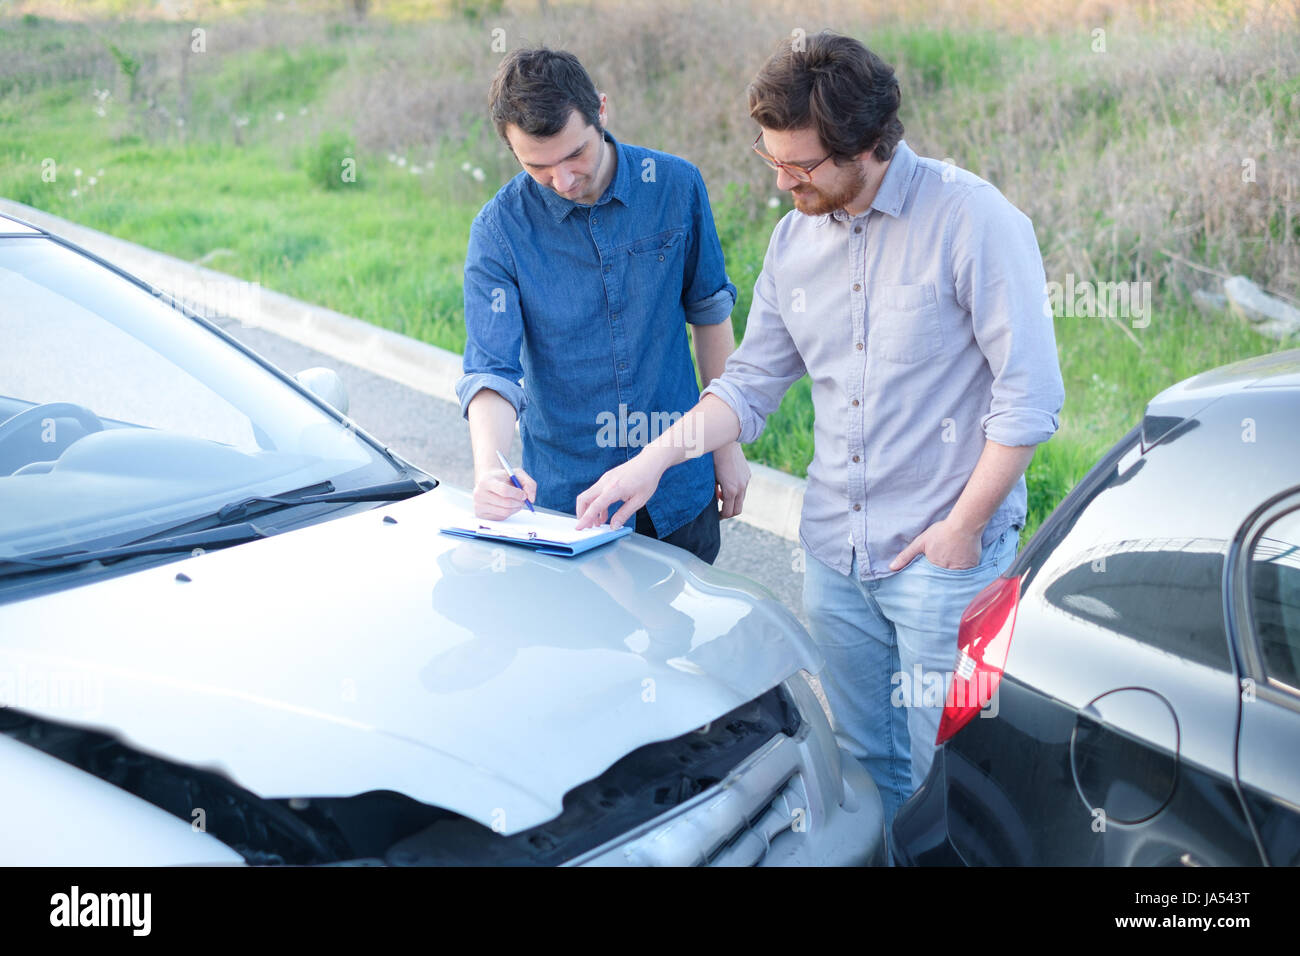 Two man finding a friendly agreement after a car accident Stock Photo